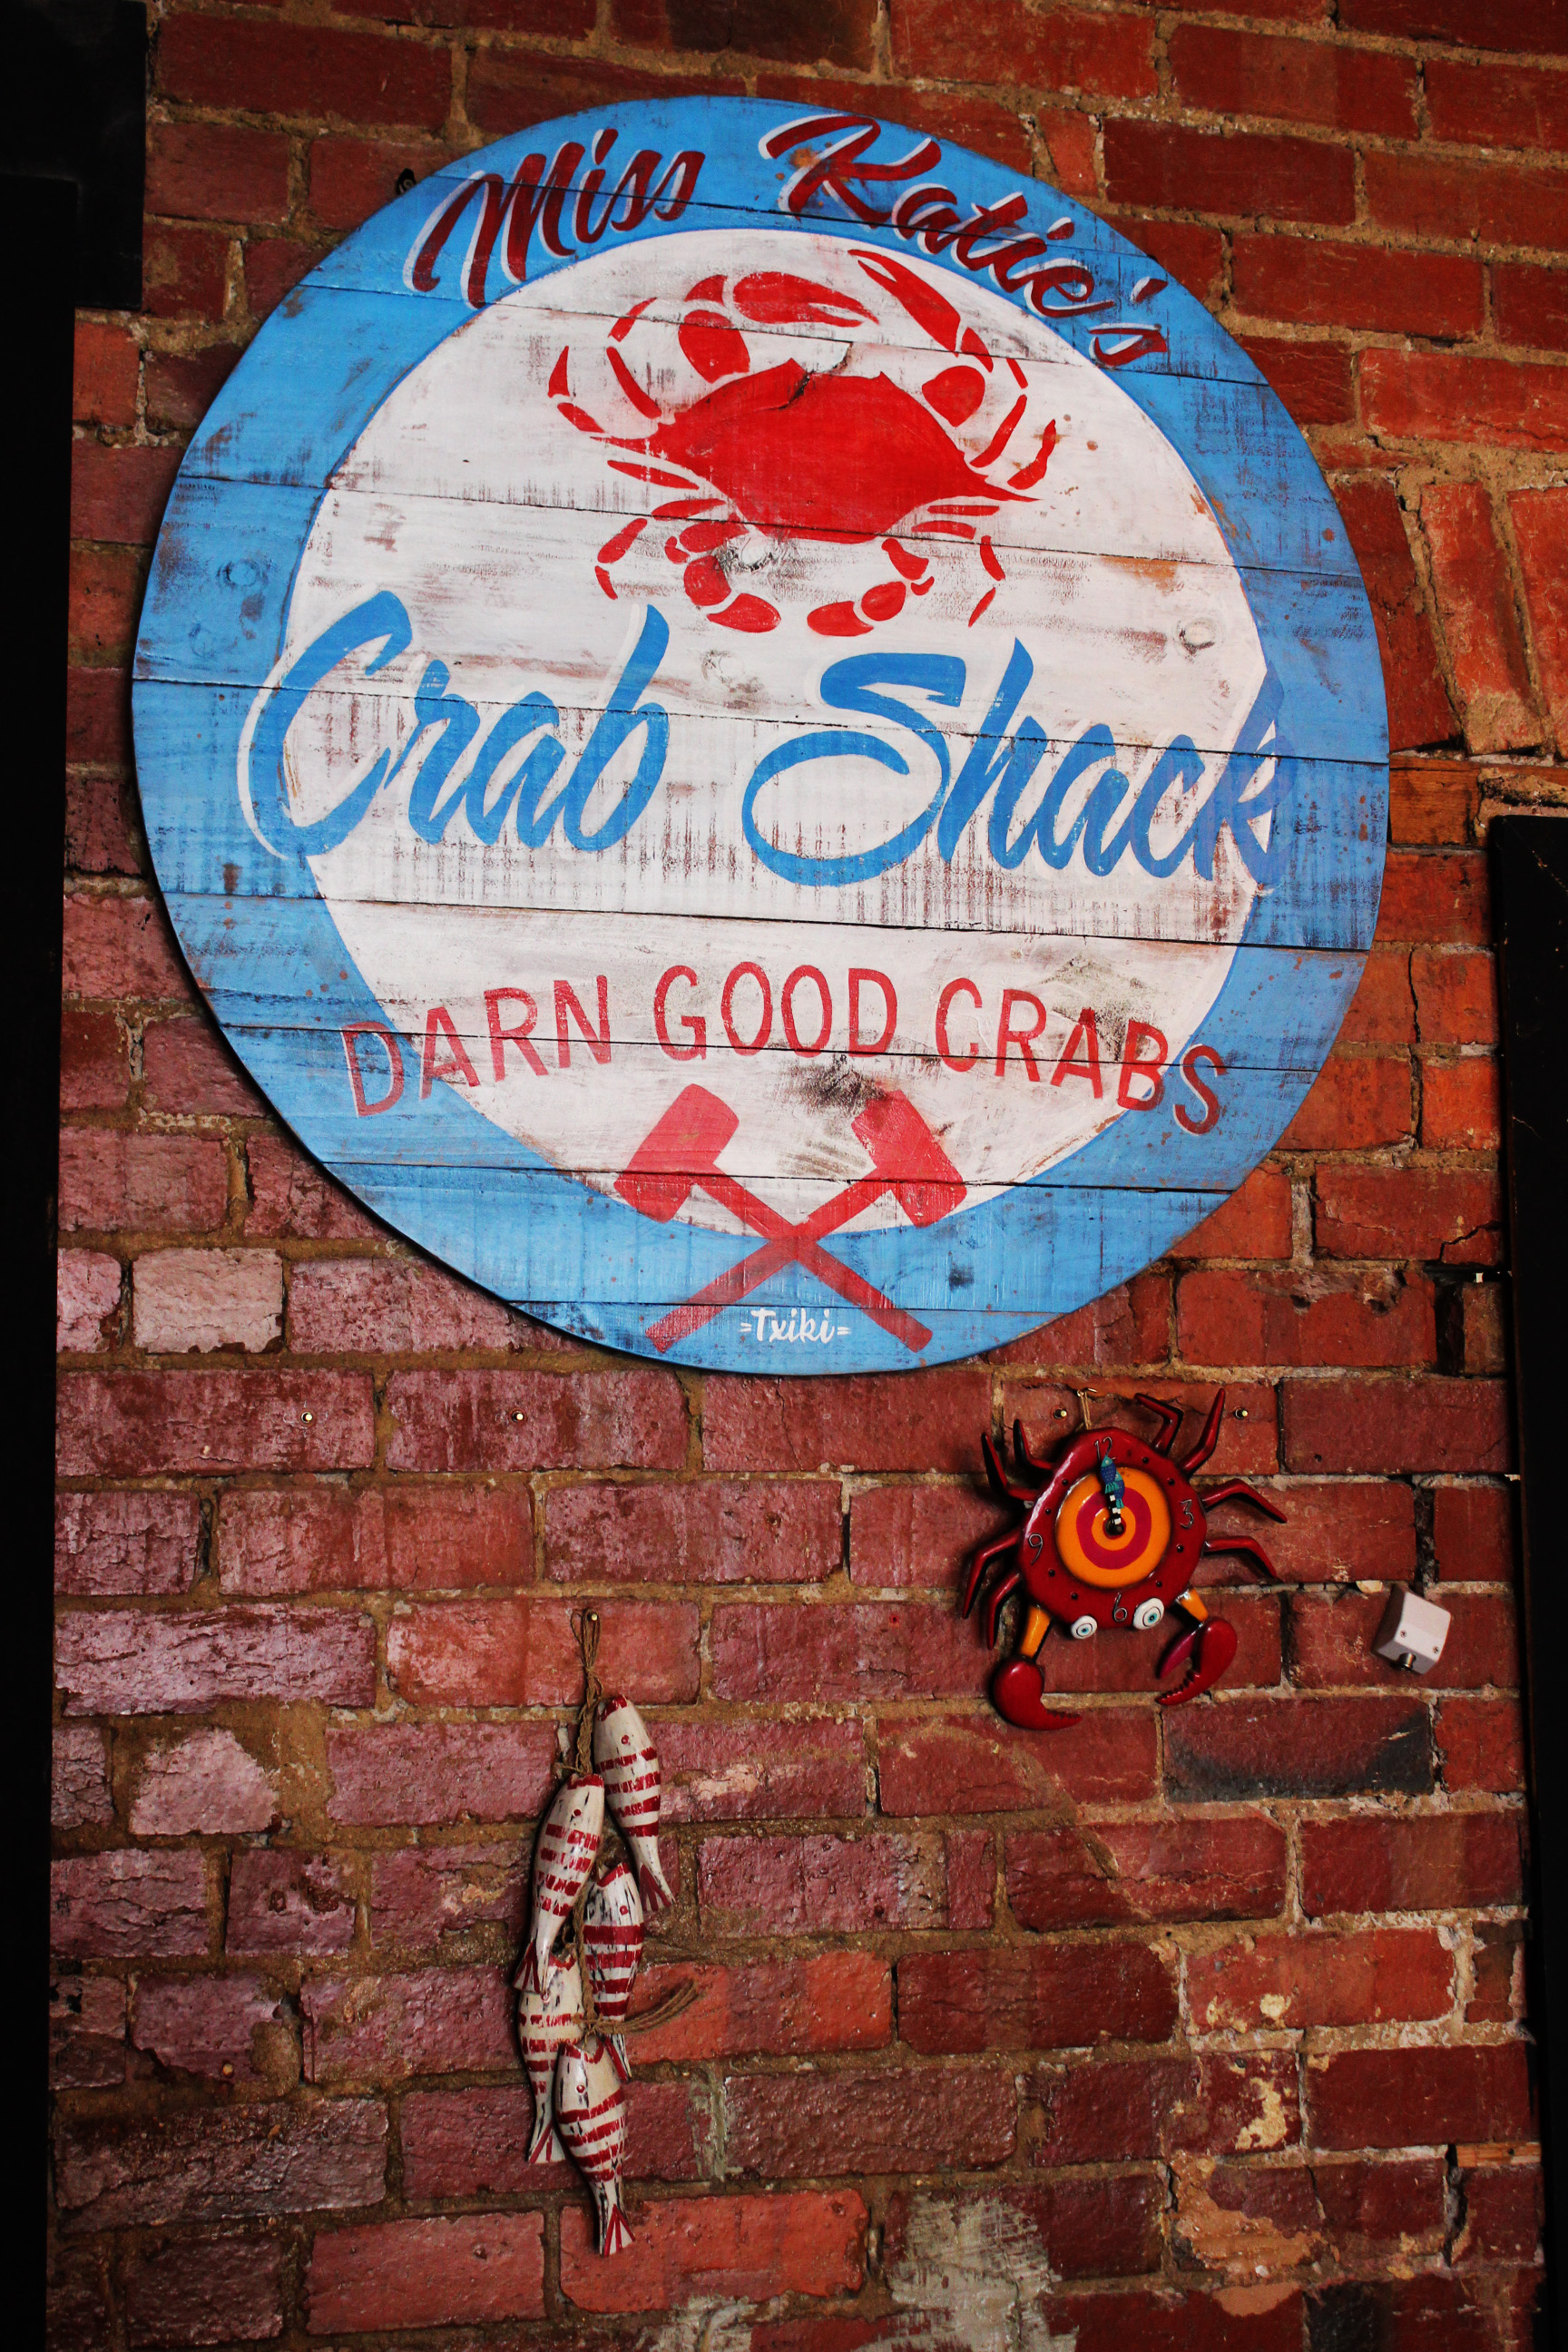 The everyday dude - Txiki - Melbourne artist - hand painted sign crab shack - Old School Sign writing - Melbourne